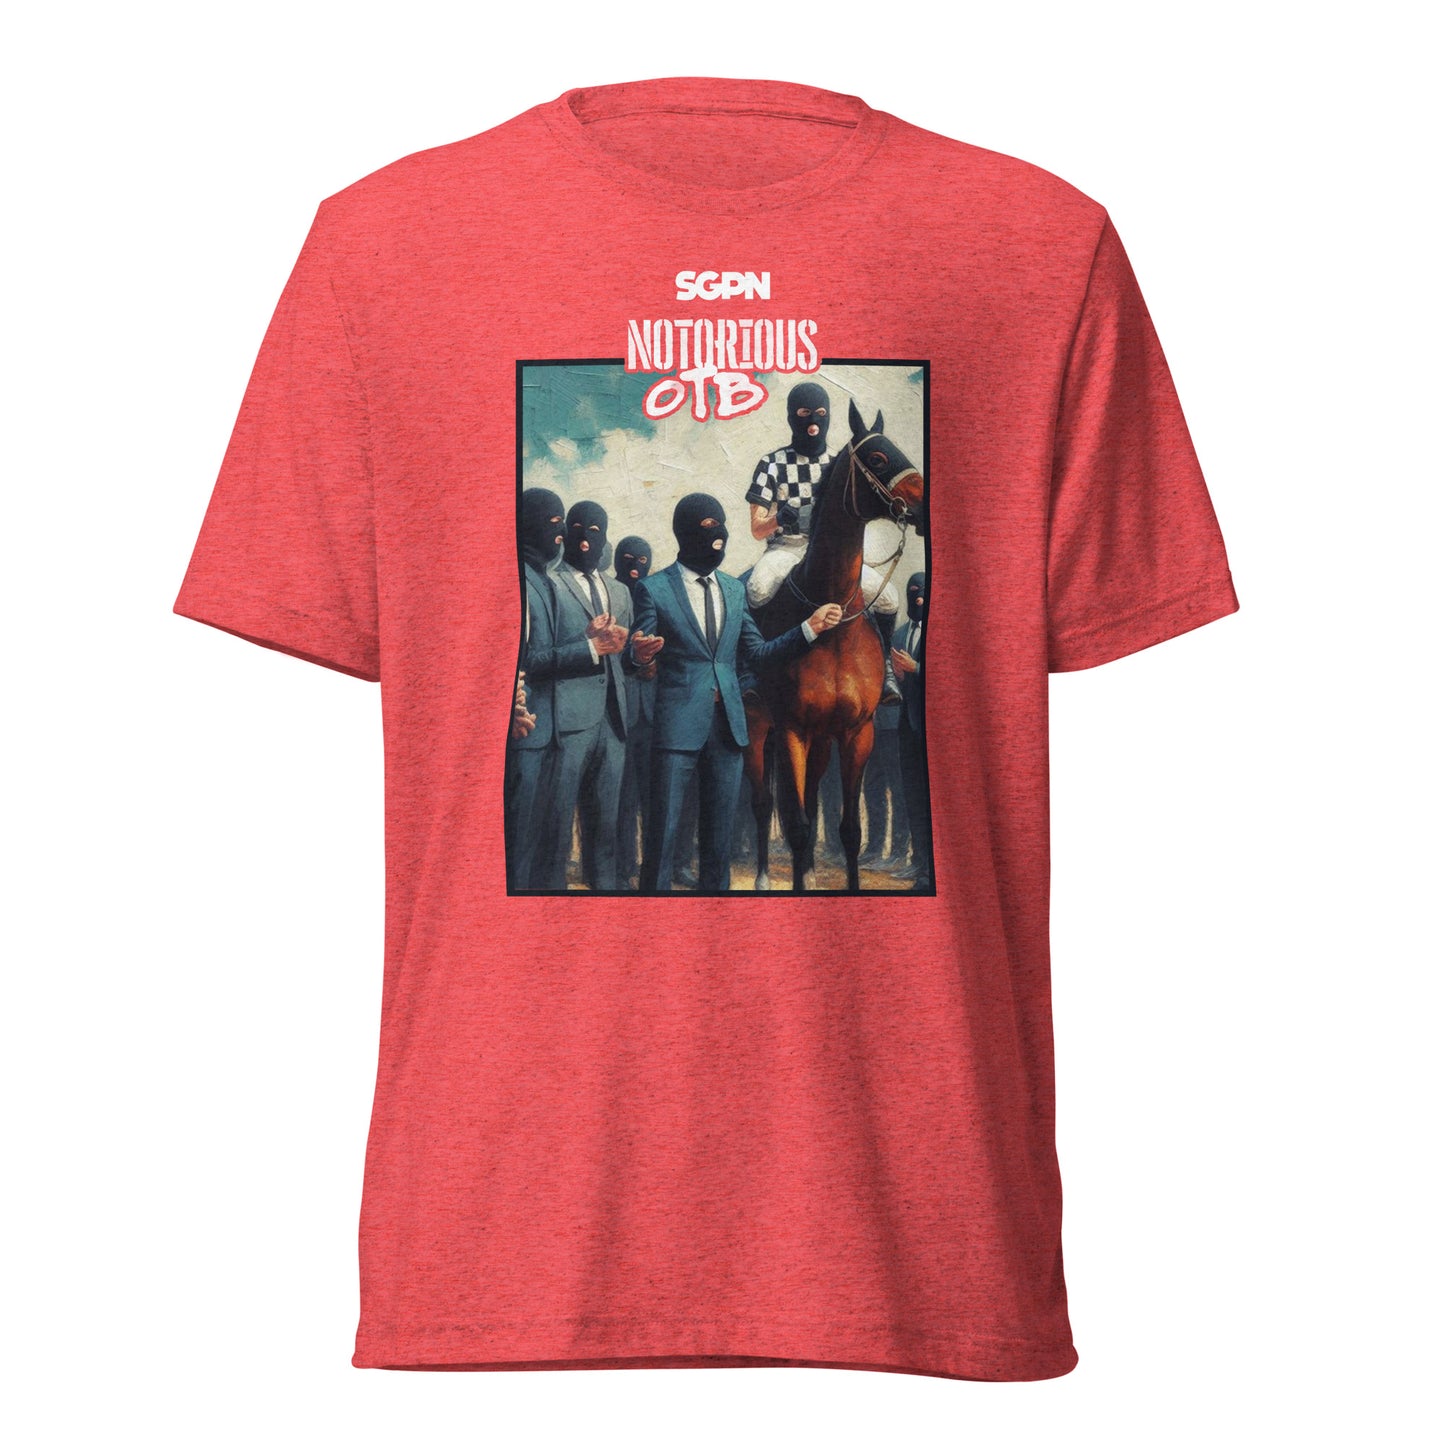 They Knew - Short sleeve t-shirt